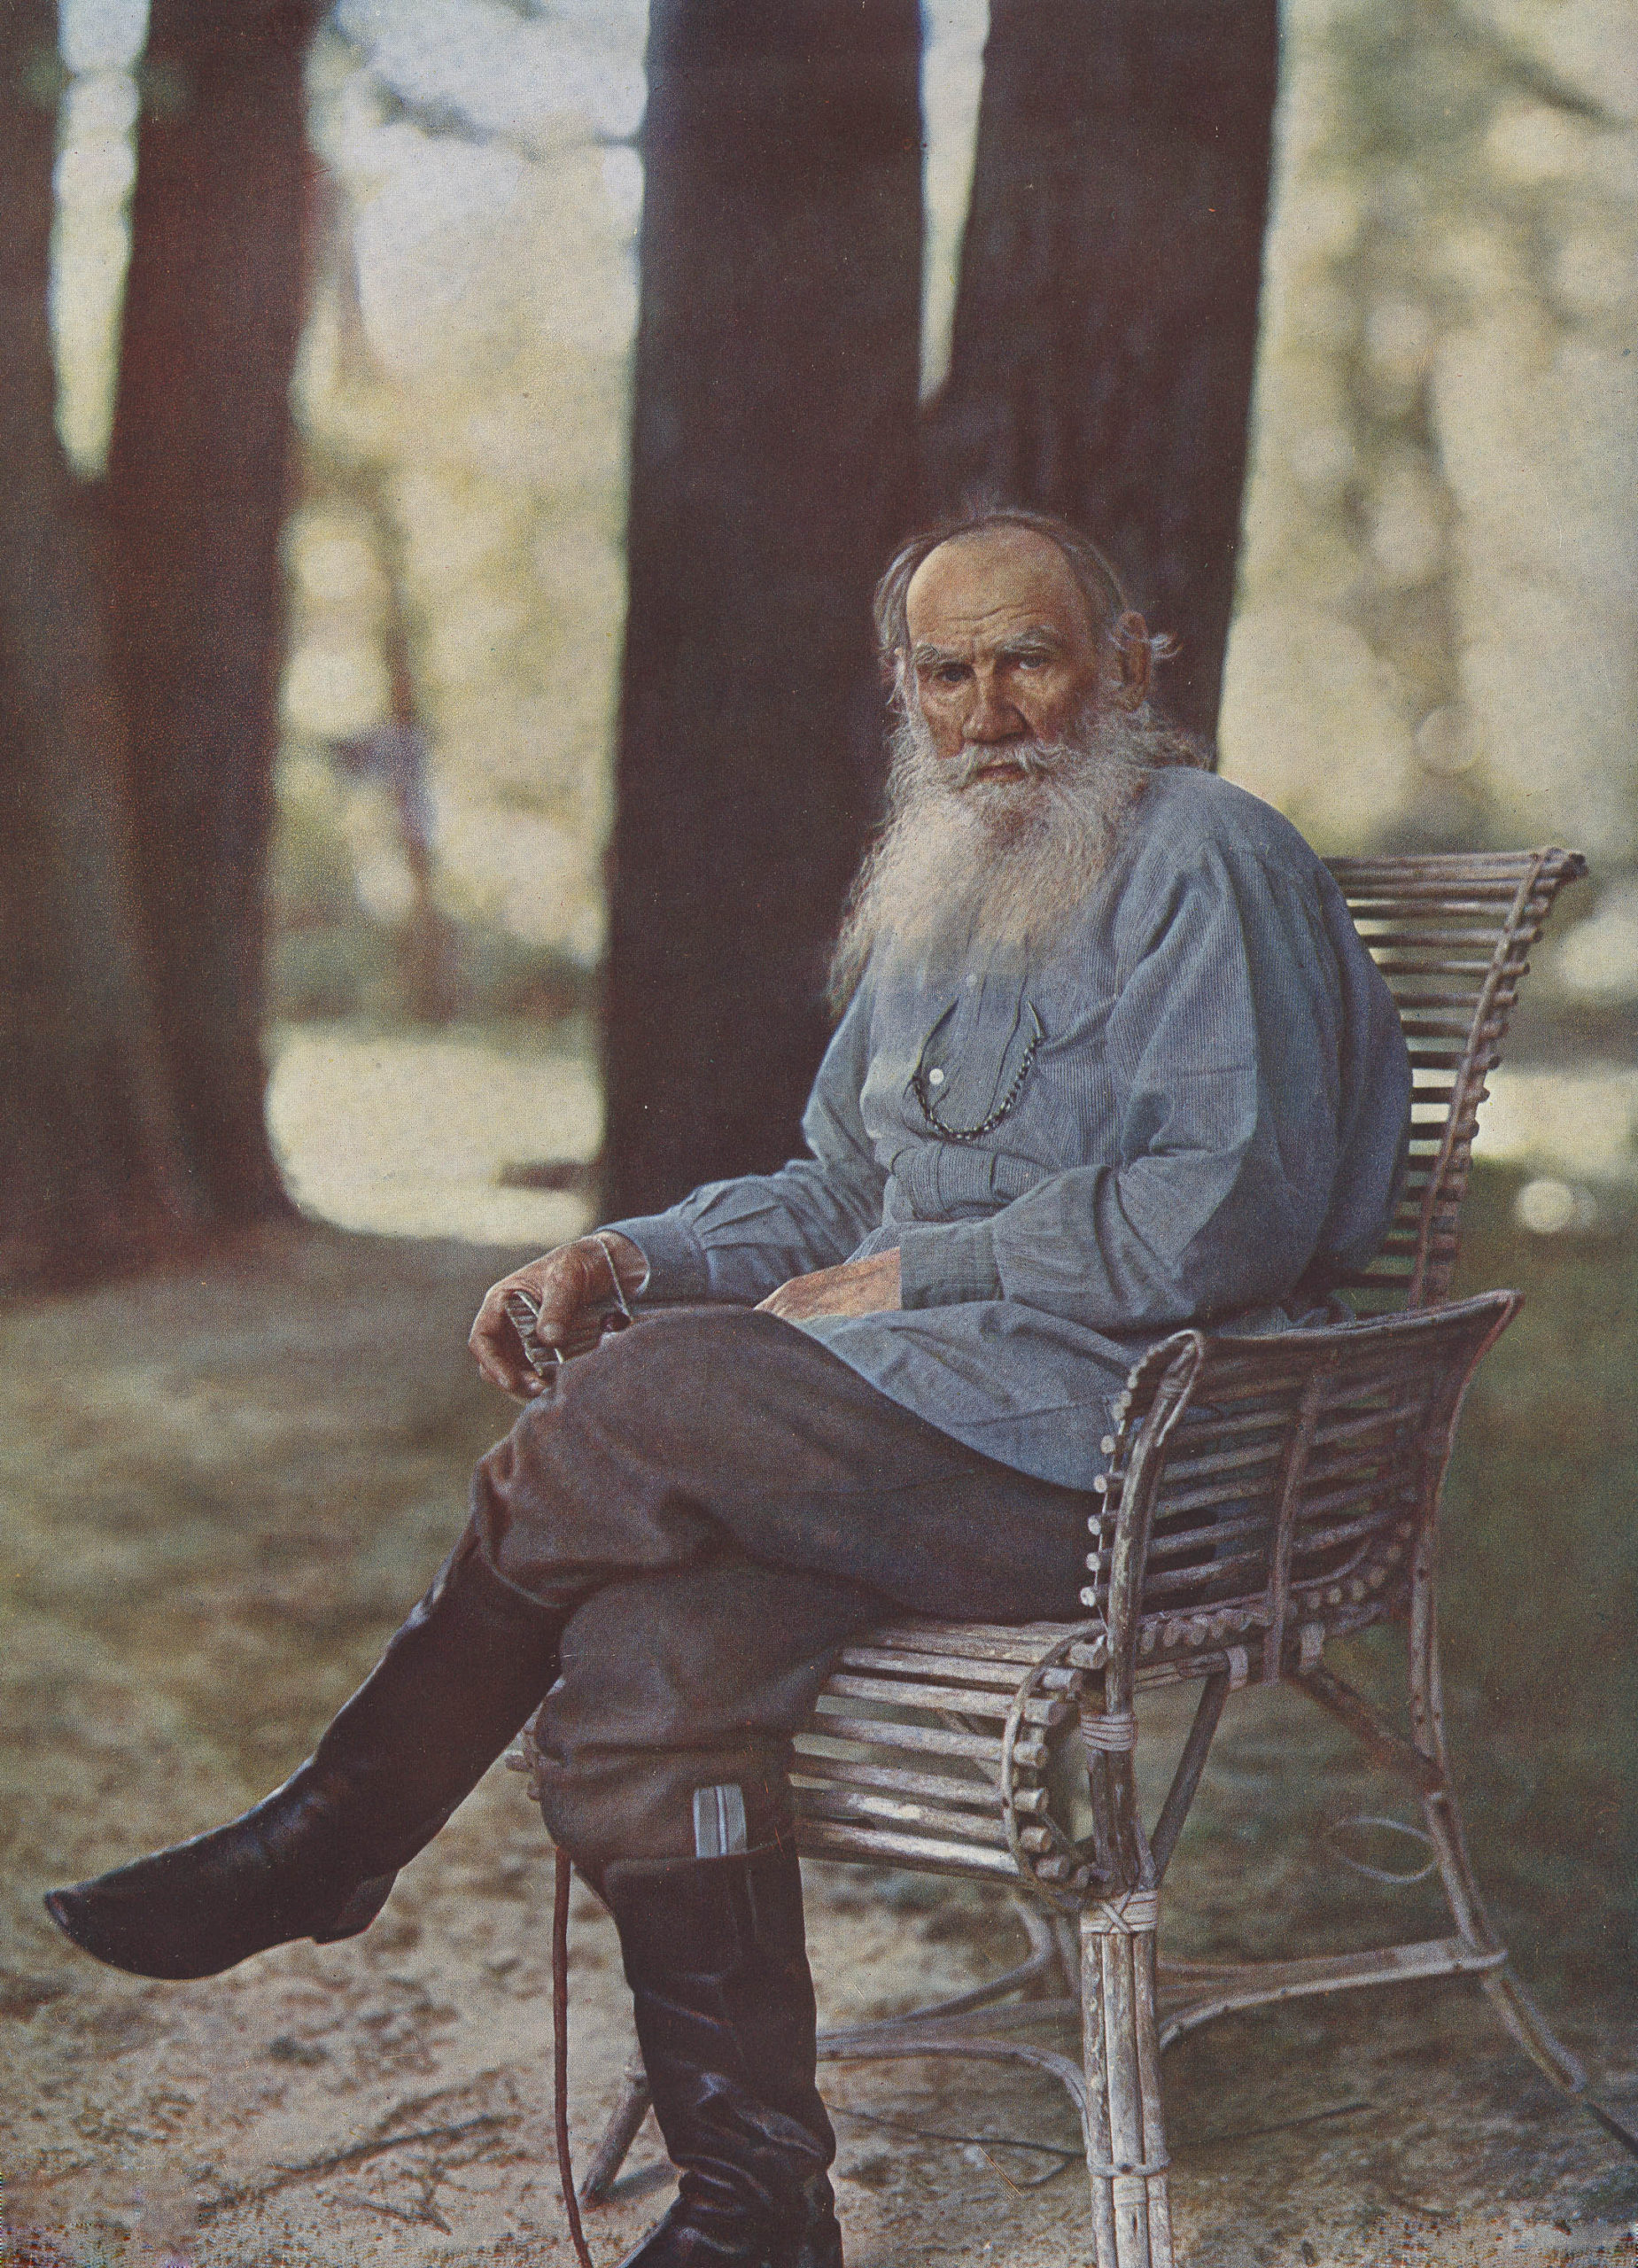 Leo Tolstoy sits on a bench in the first color photo portrait in Russia, 1908 (Litograph print by Sergey Prokudin-Gorsky).